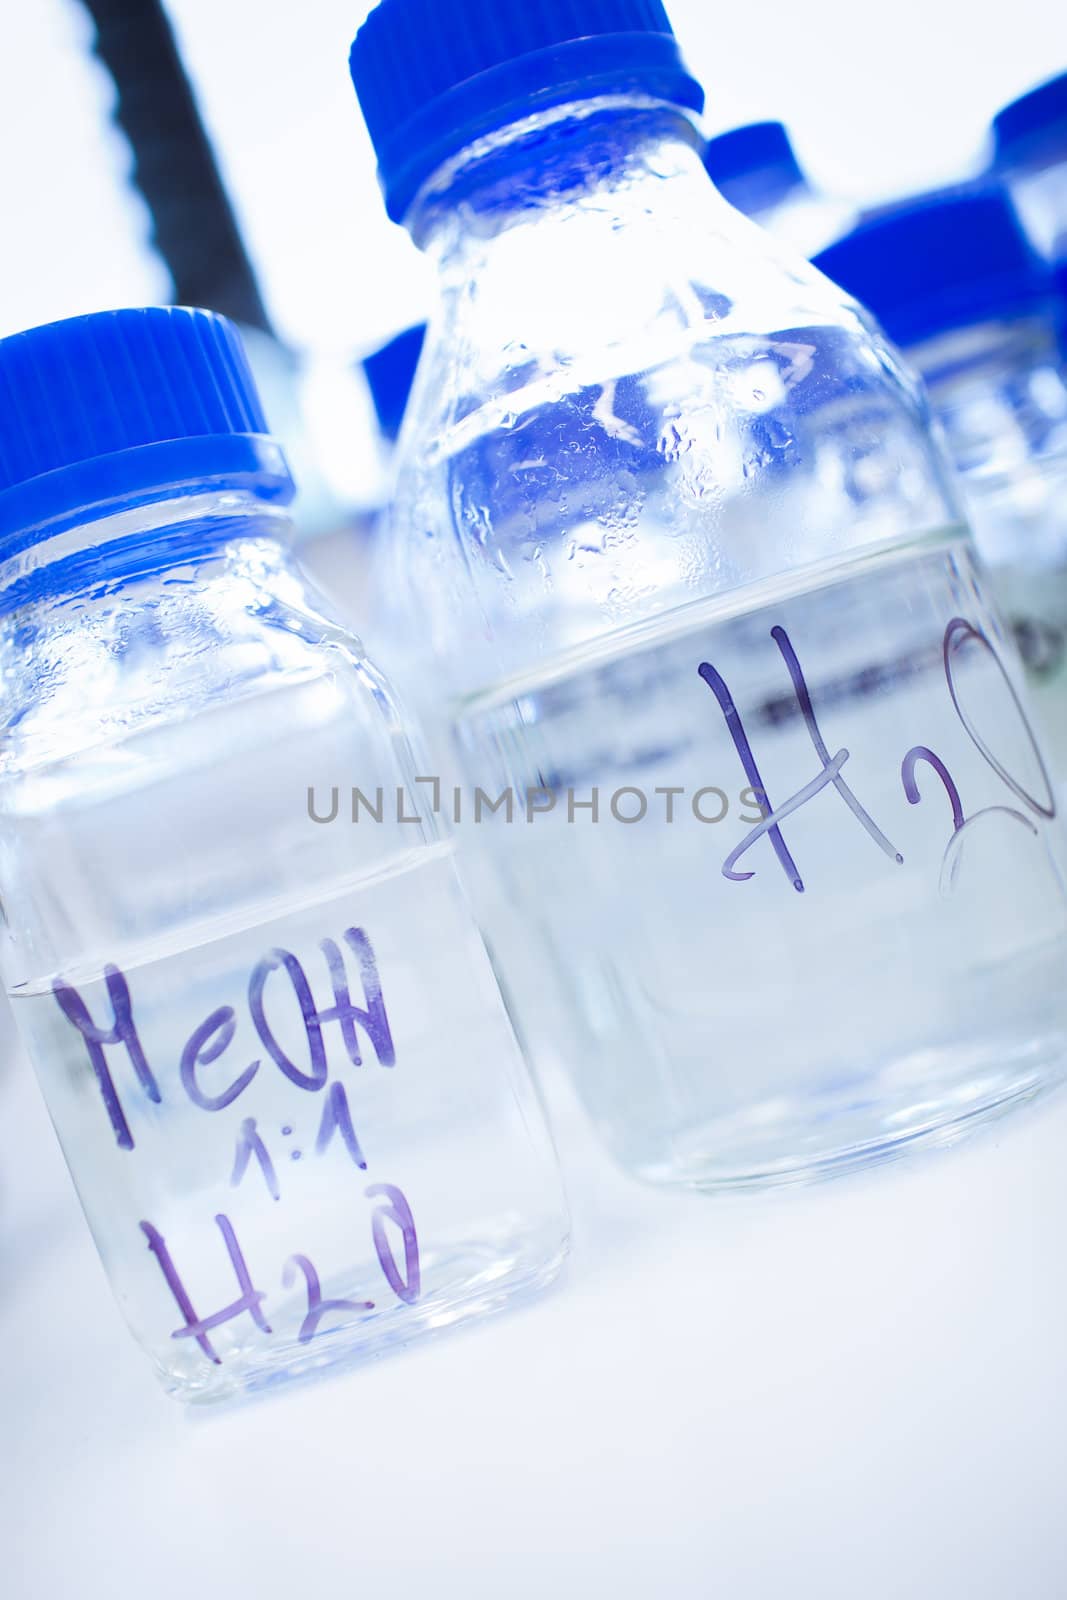 Glassware in a chemistry lab (shallow DOF; focus on the beakers in the foreground)